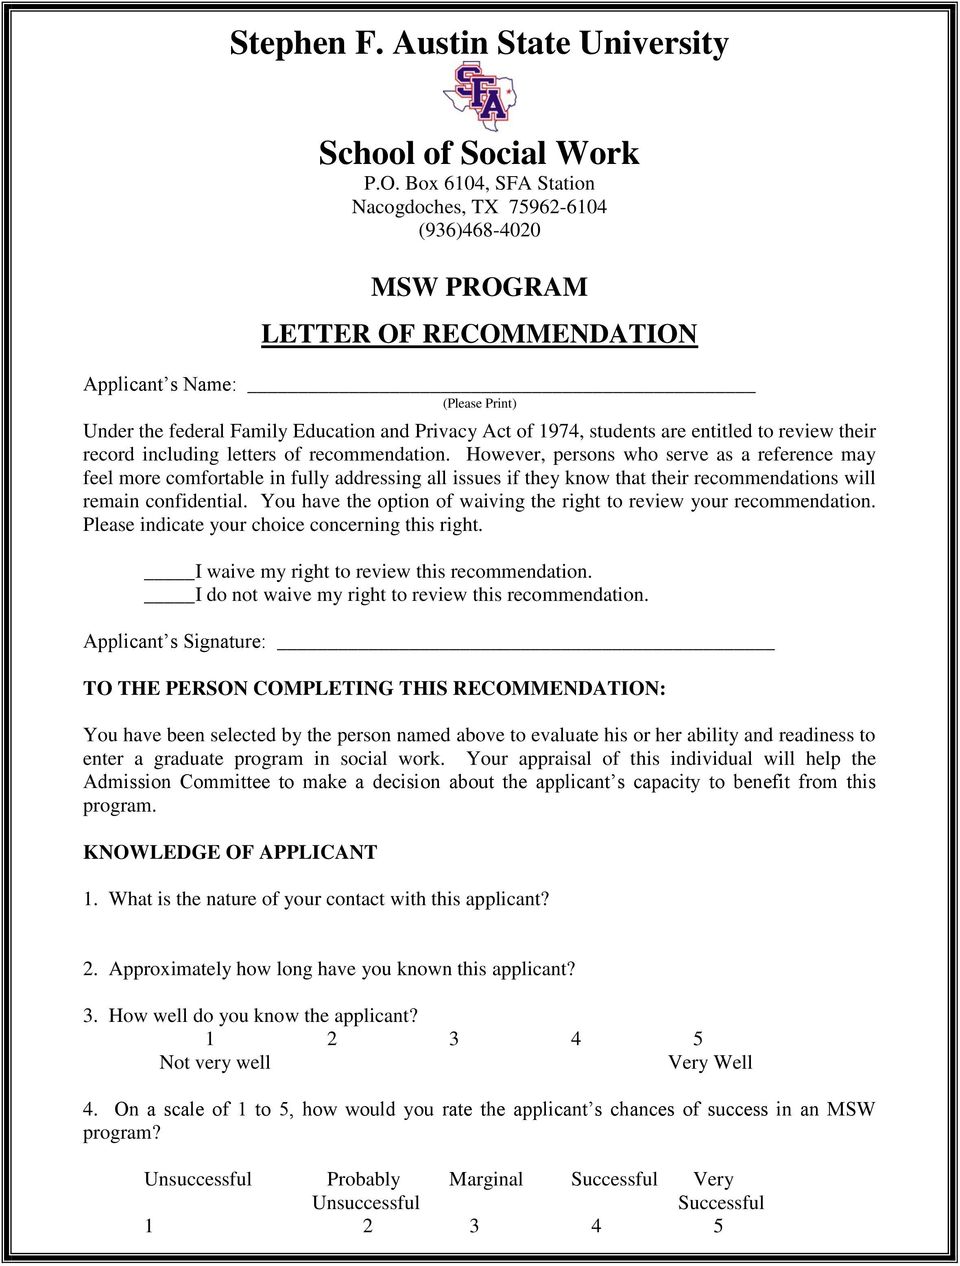 students are entitled to review their record including letters of recommendation.